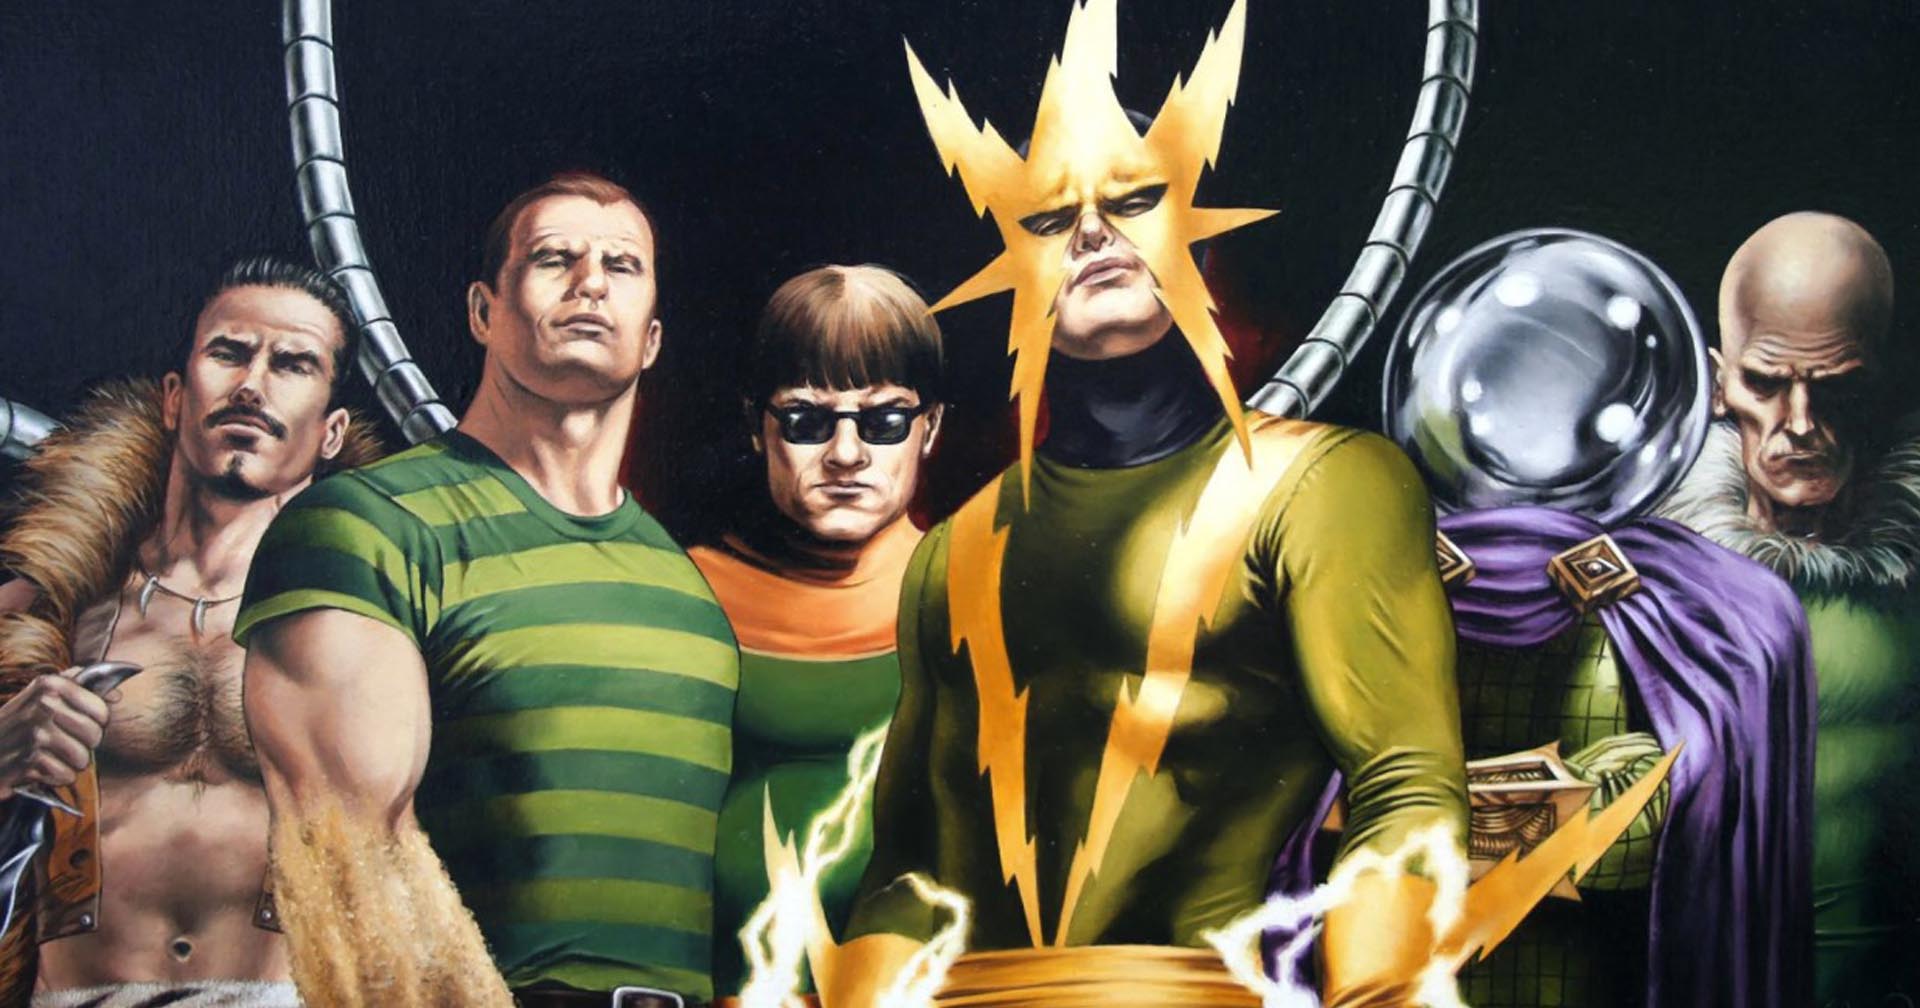 The sinister six, Spider-Man, Sony